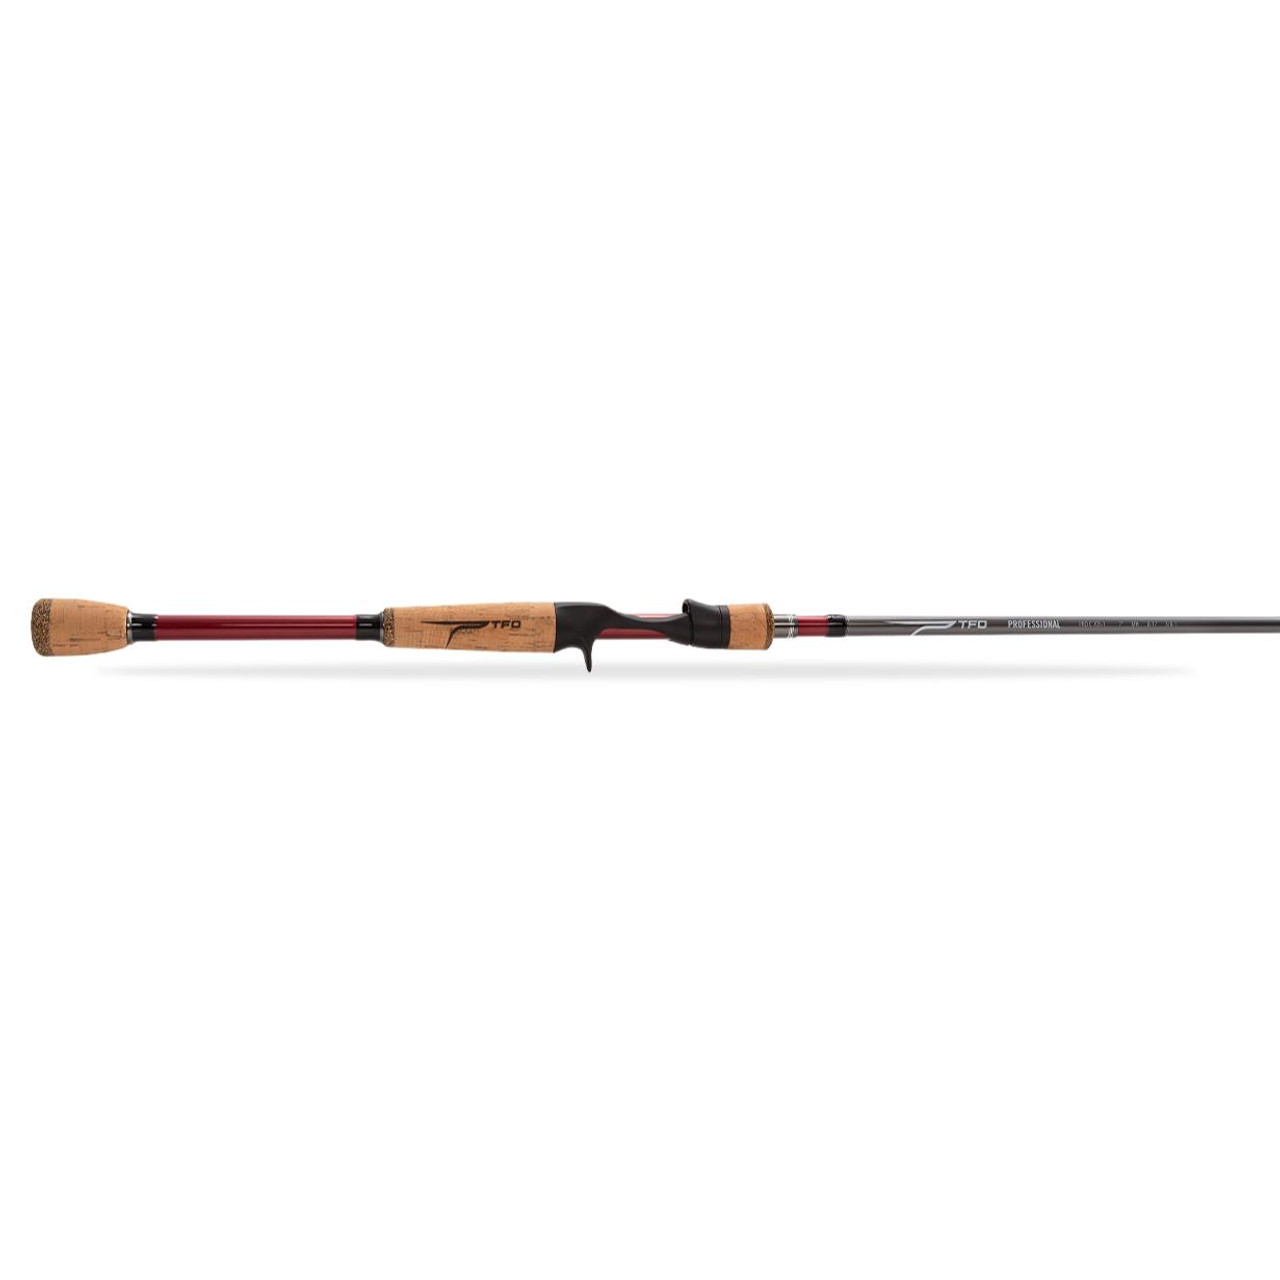 Temple Fork Outfitters Professional Casting Rod #PRO C 665-1